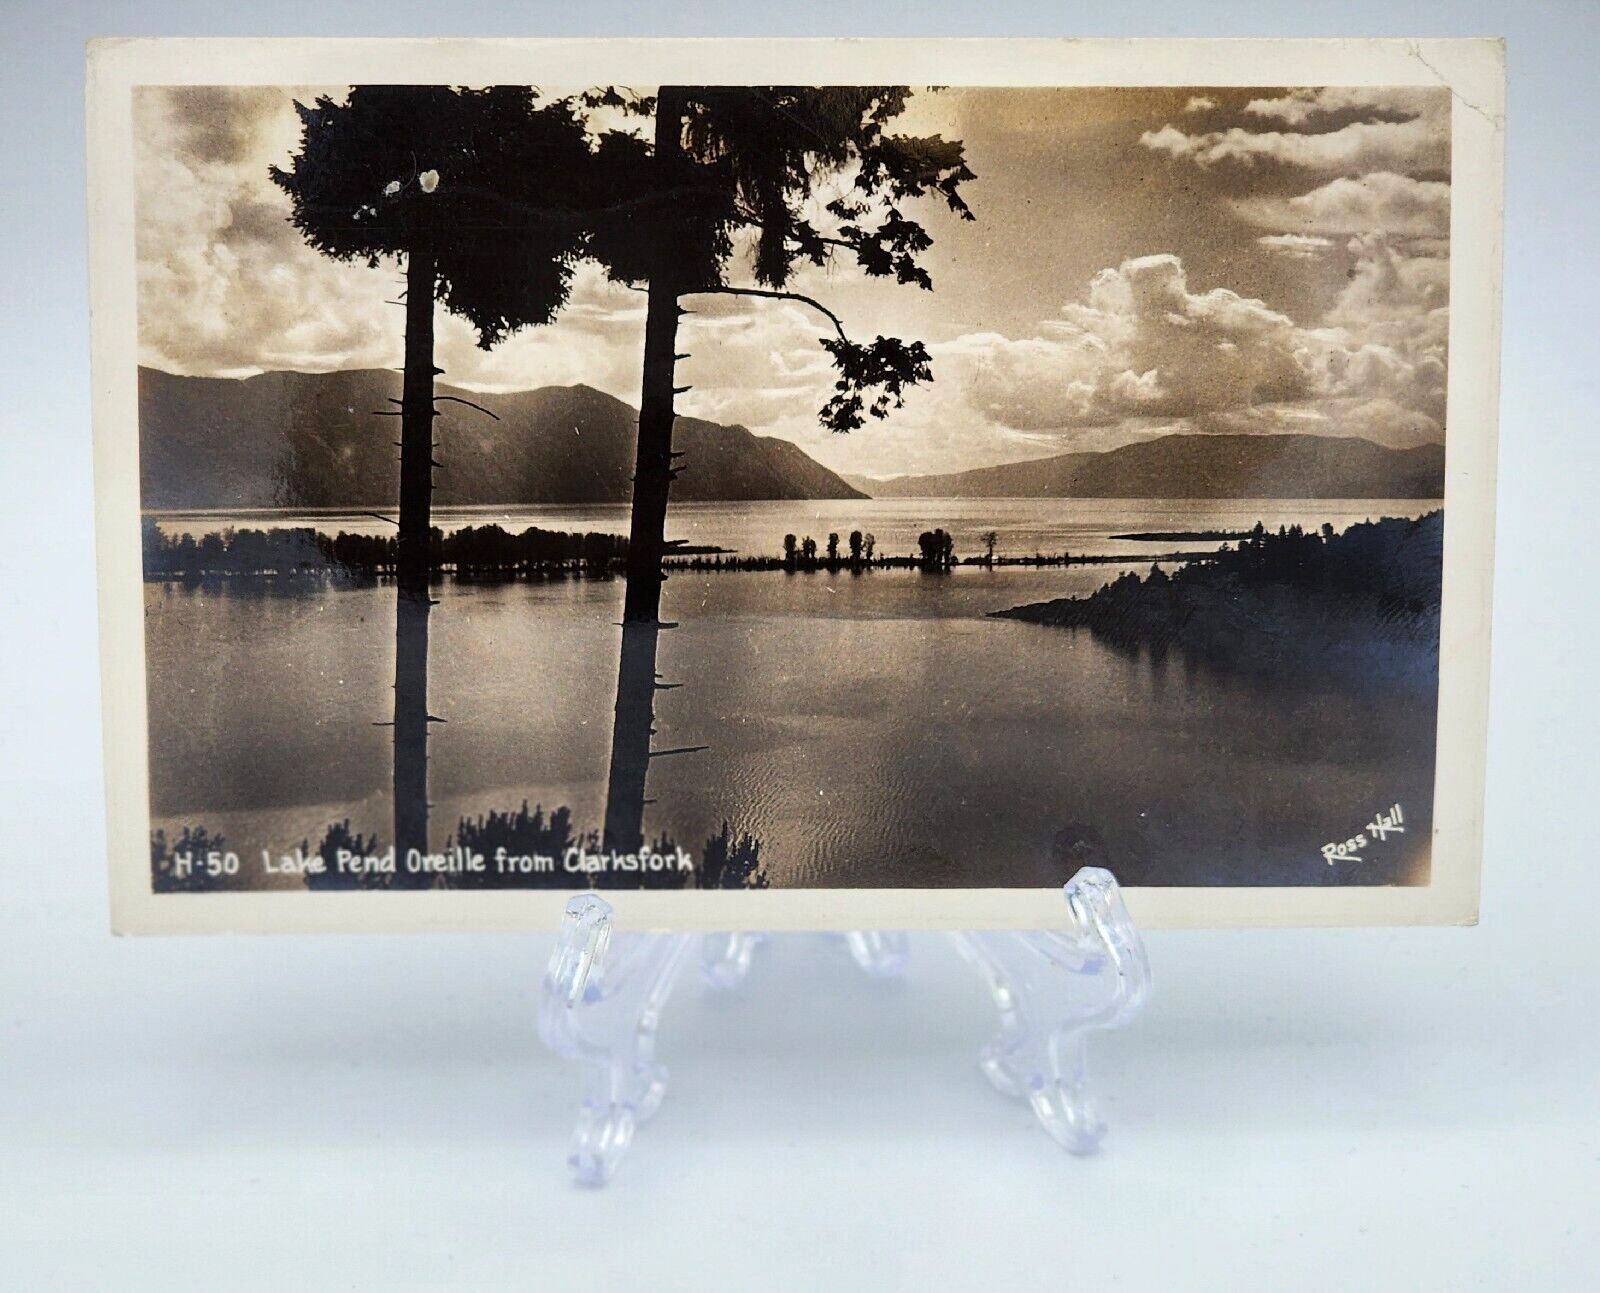 RPPC Postcard~ Lake Pend Oreille From Clarksfork, Idaho~ By Ross Hall